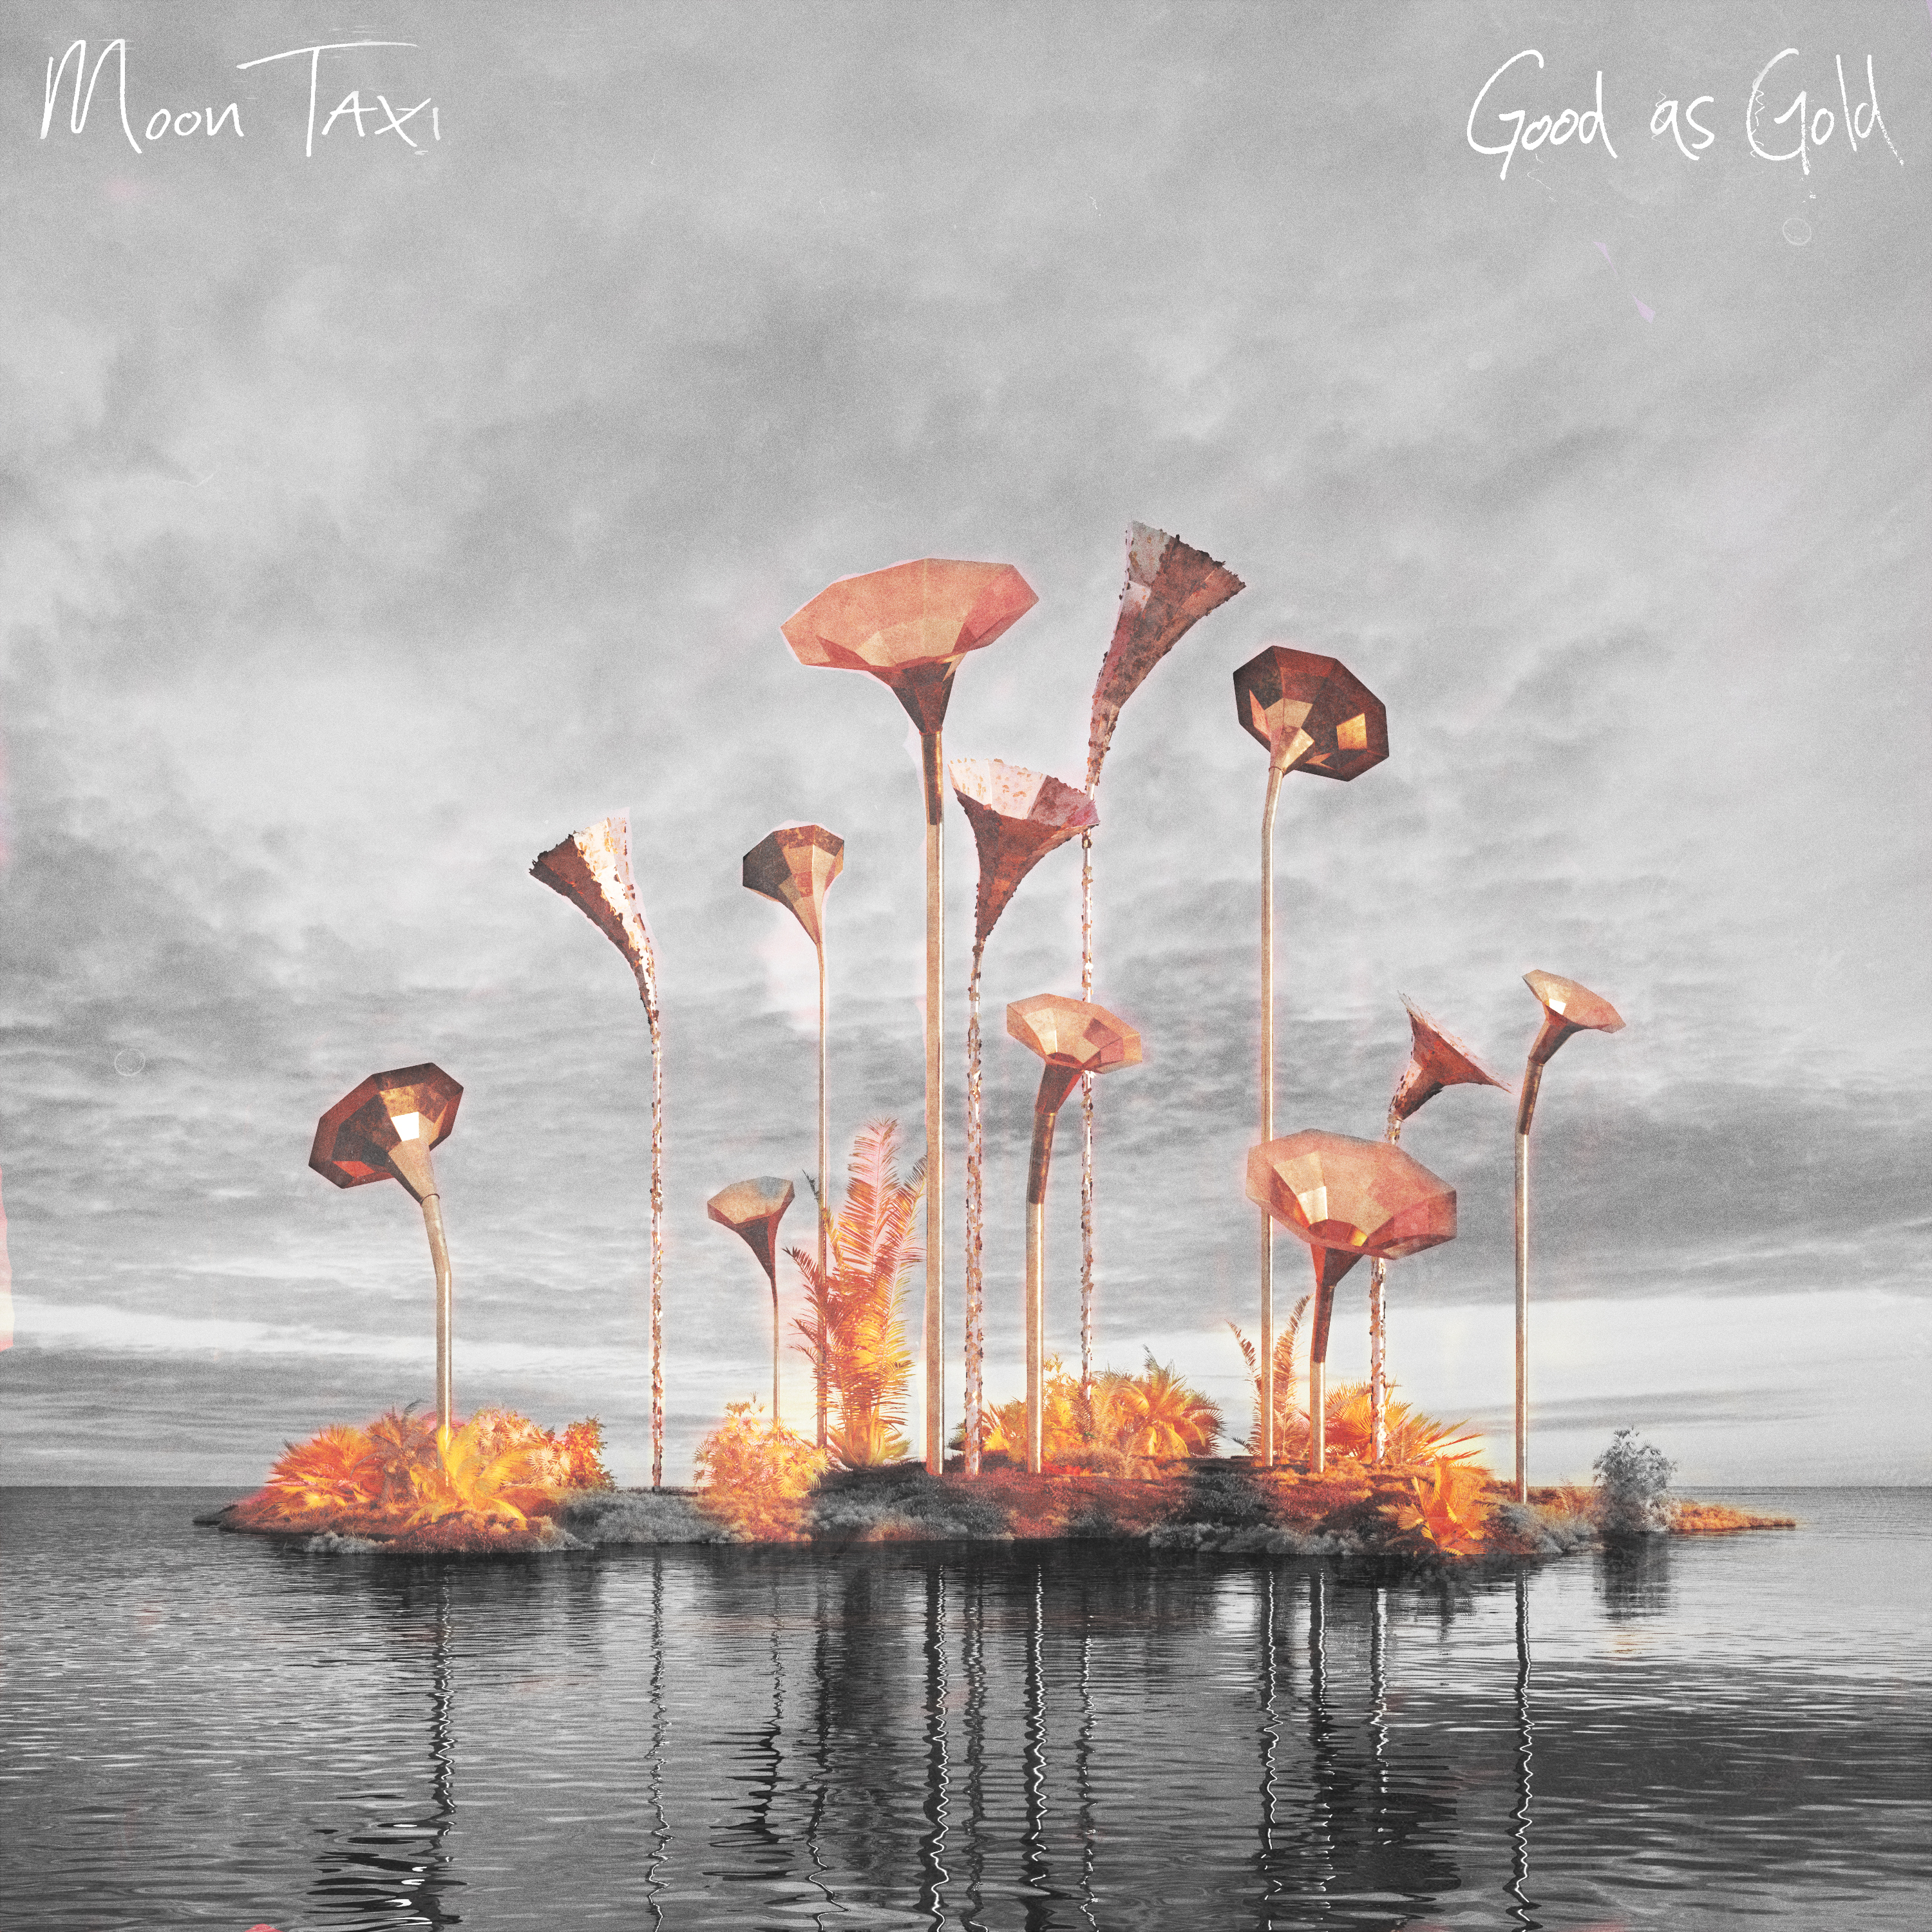 Good as gold three laws. Moon Taxi good as Gold. As good as Gold. Песня good as Gold Moon Taxi. Good as Gold песня.